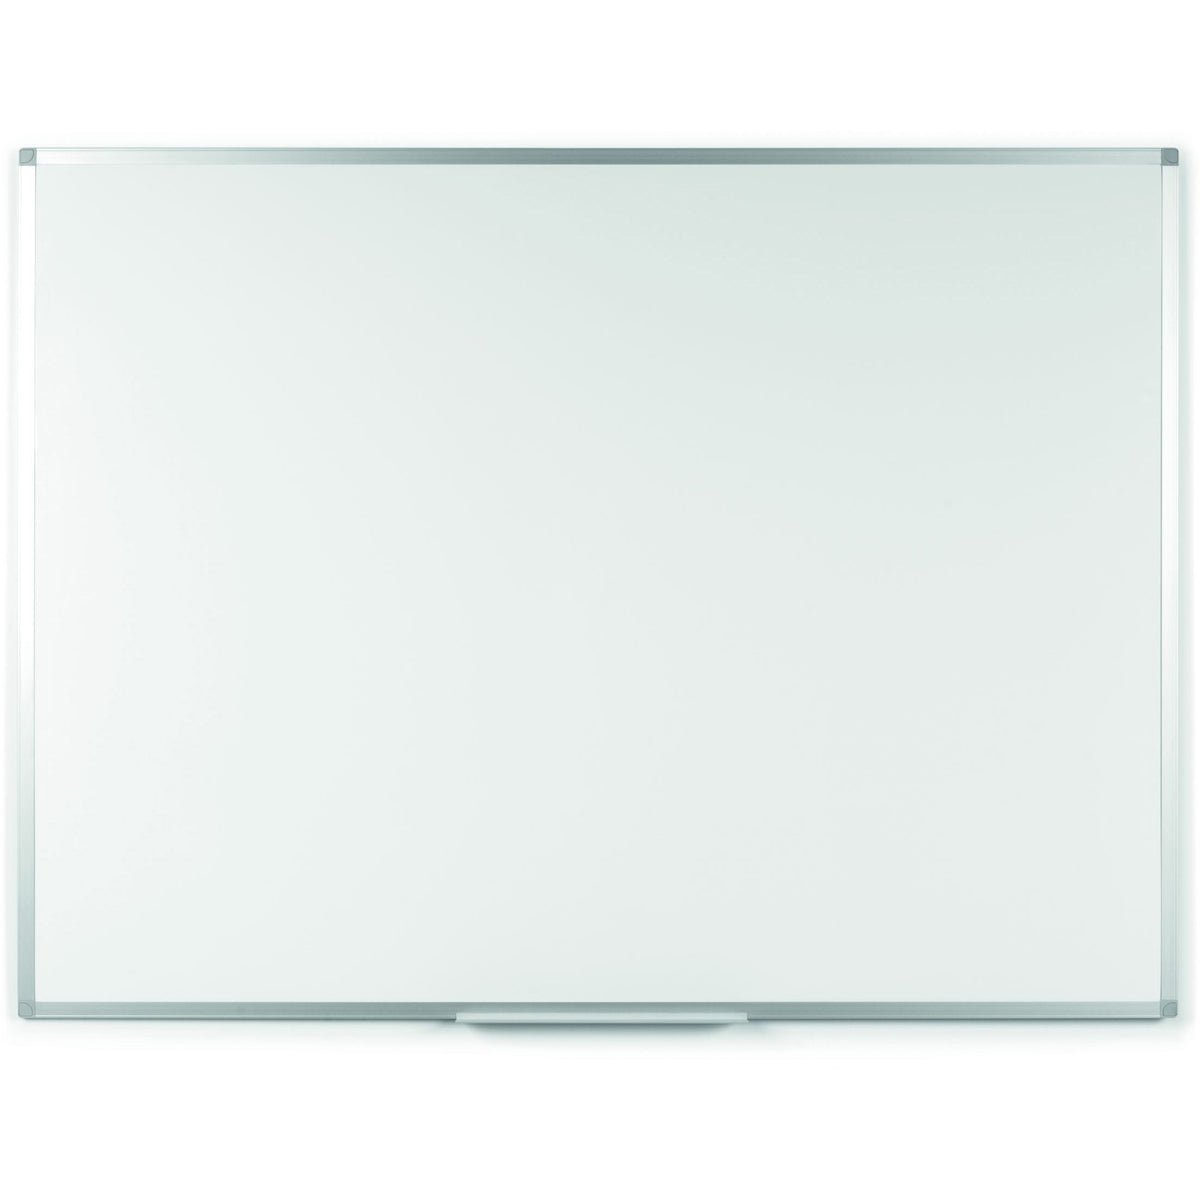 MA051539214 Ayda Non-Magnetic Melamine Dry Erase White Board, 36" x 48", Aluminum Frame, Wall Mounting Kit by MasterVision